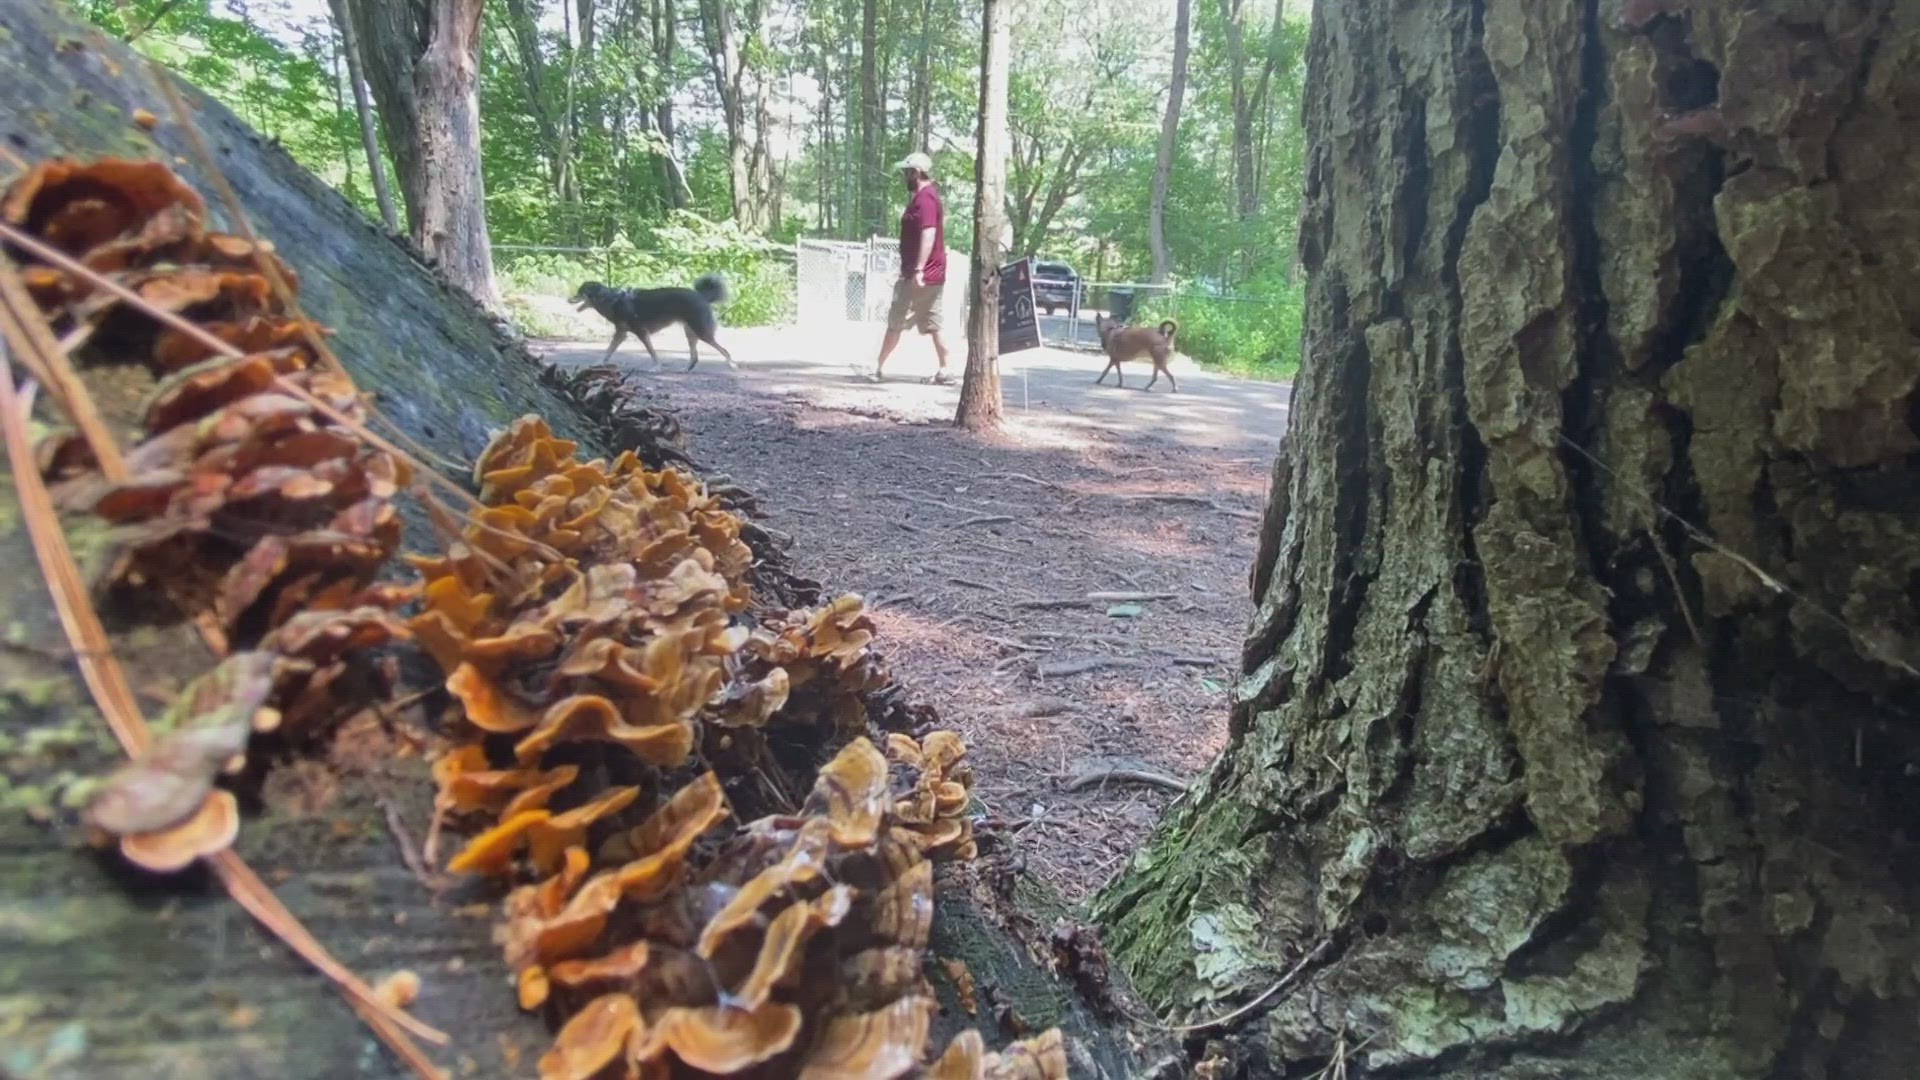 If your dog eats a mushroom and feels sick, it's best to take them to the veterinarian. After the rainy spring and summer, more mushrooms are expected.